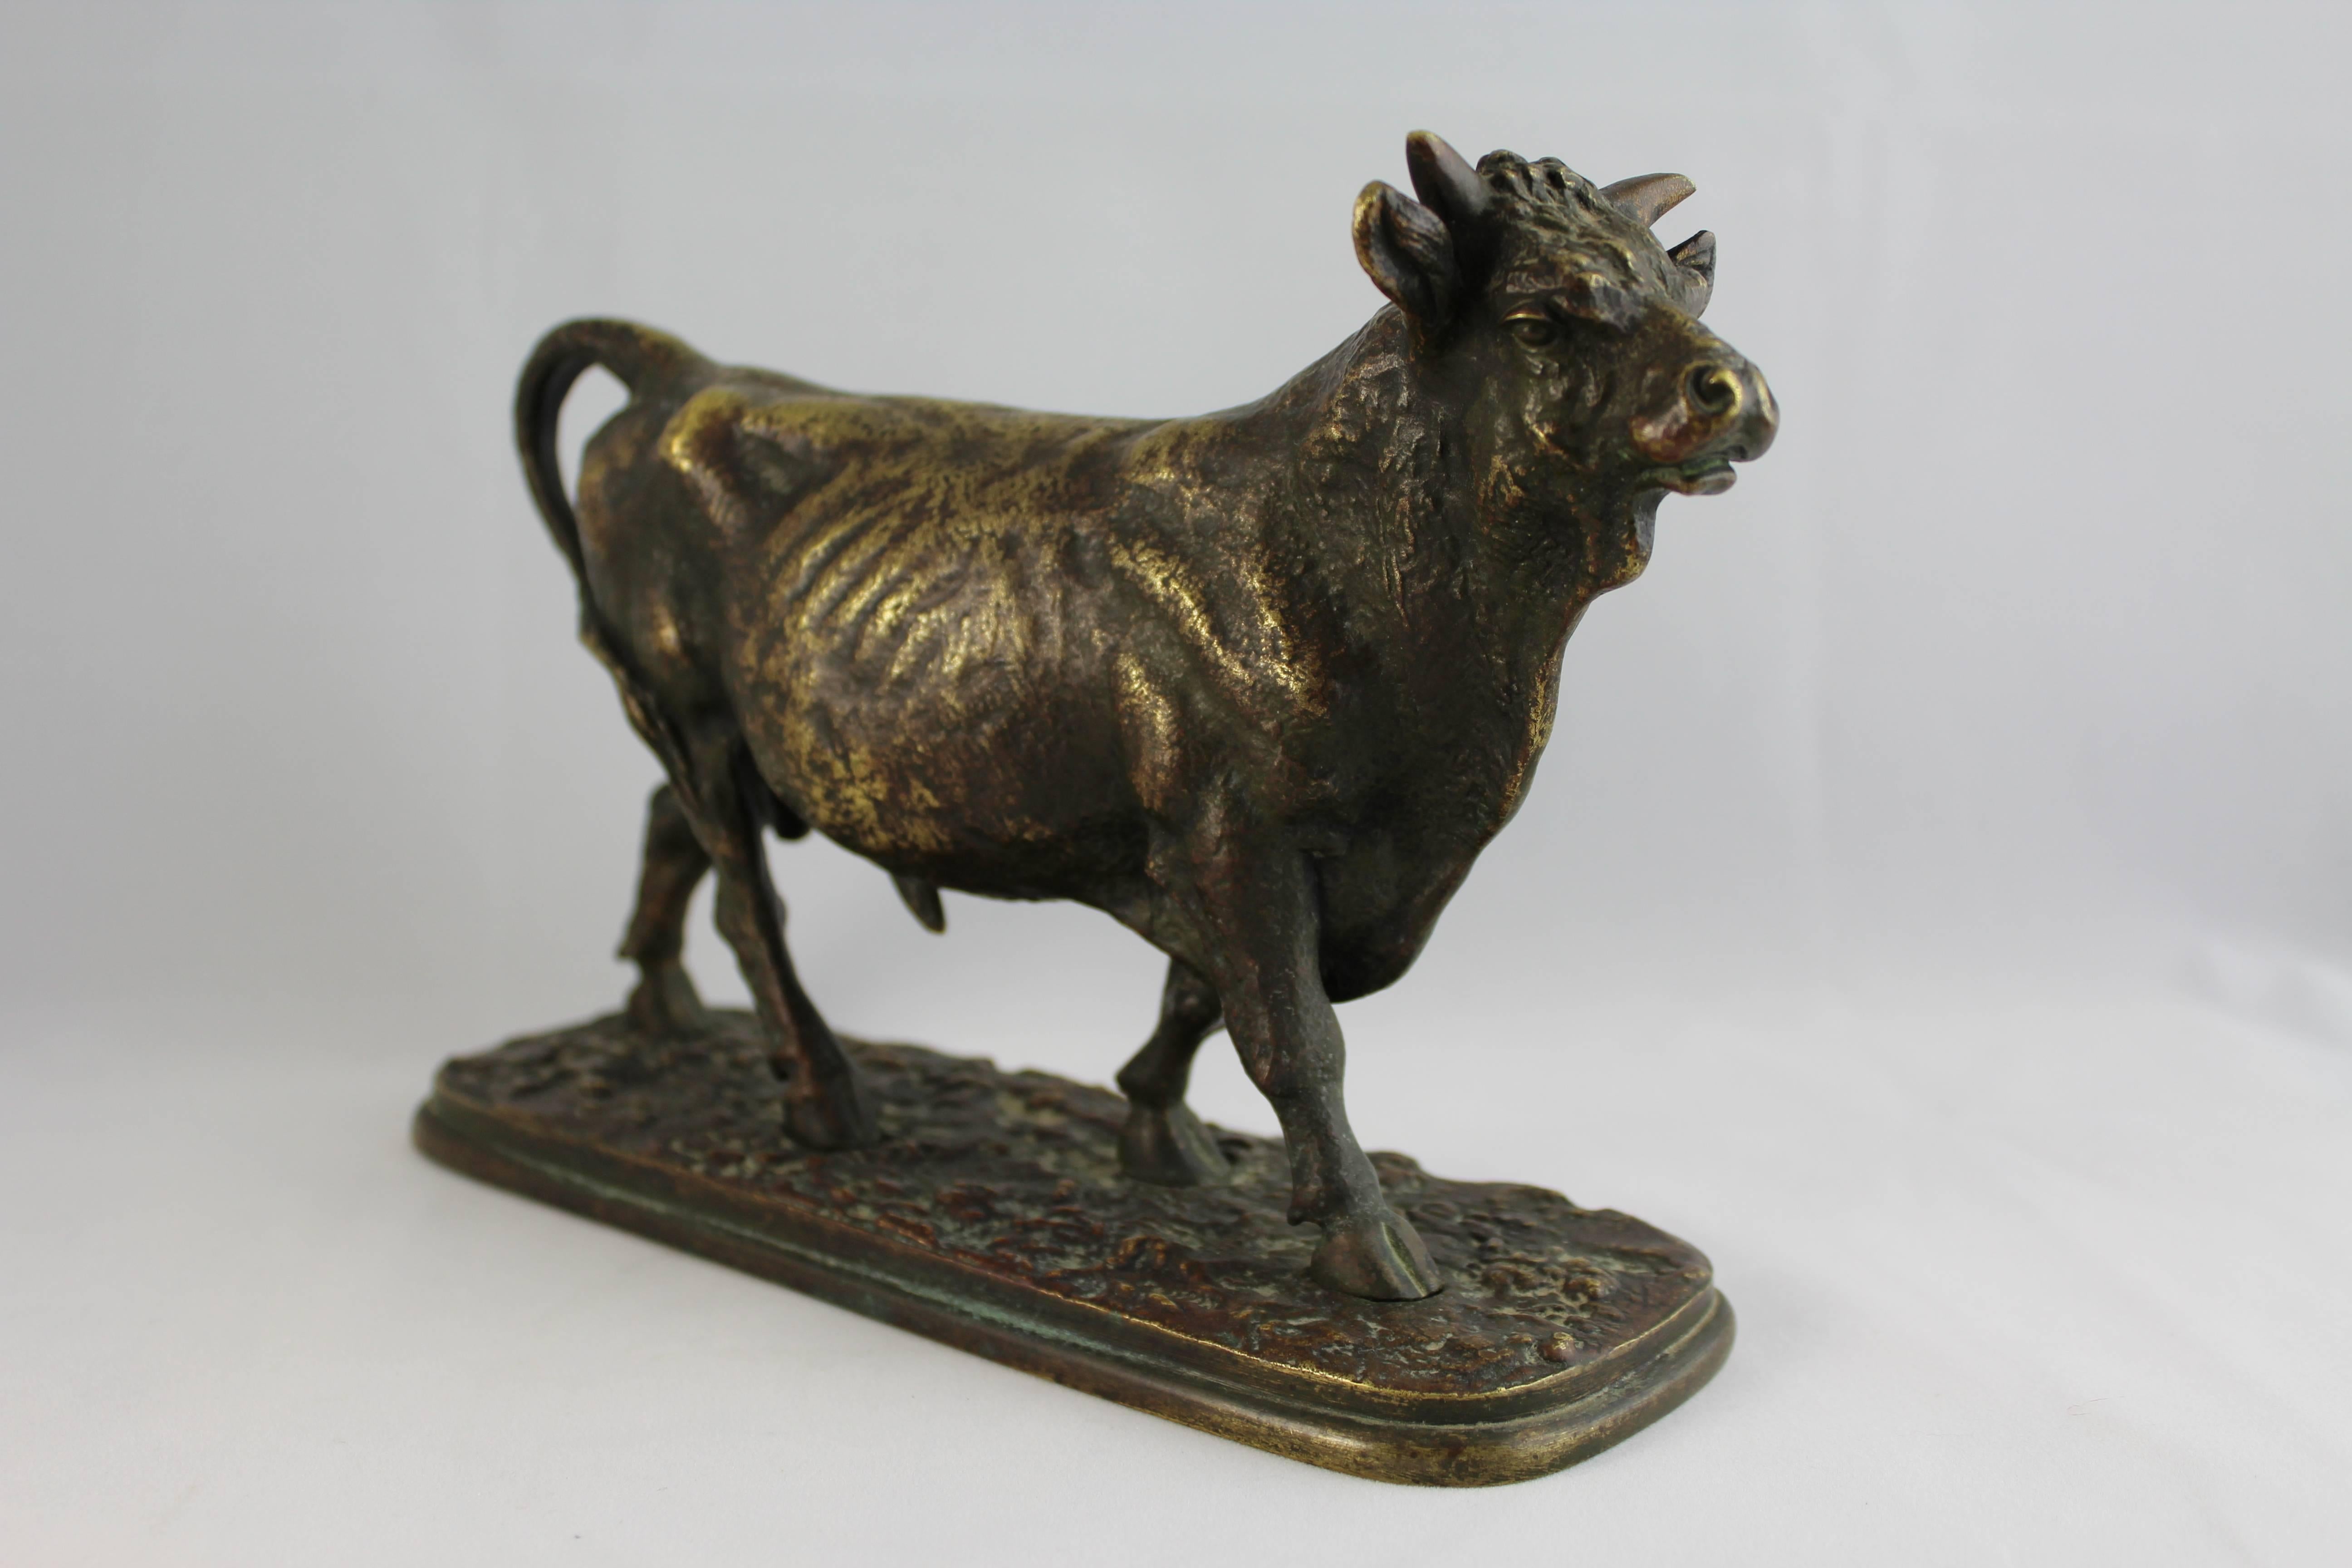 Christophe Fratin (French, 1801-1864), The Bull, bronze sculpture, signed on base, overall: 6